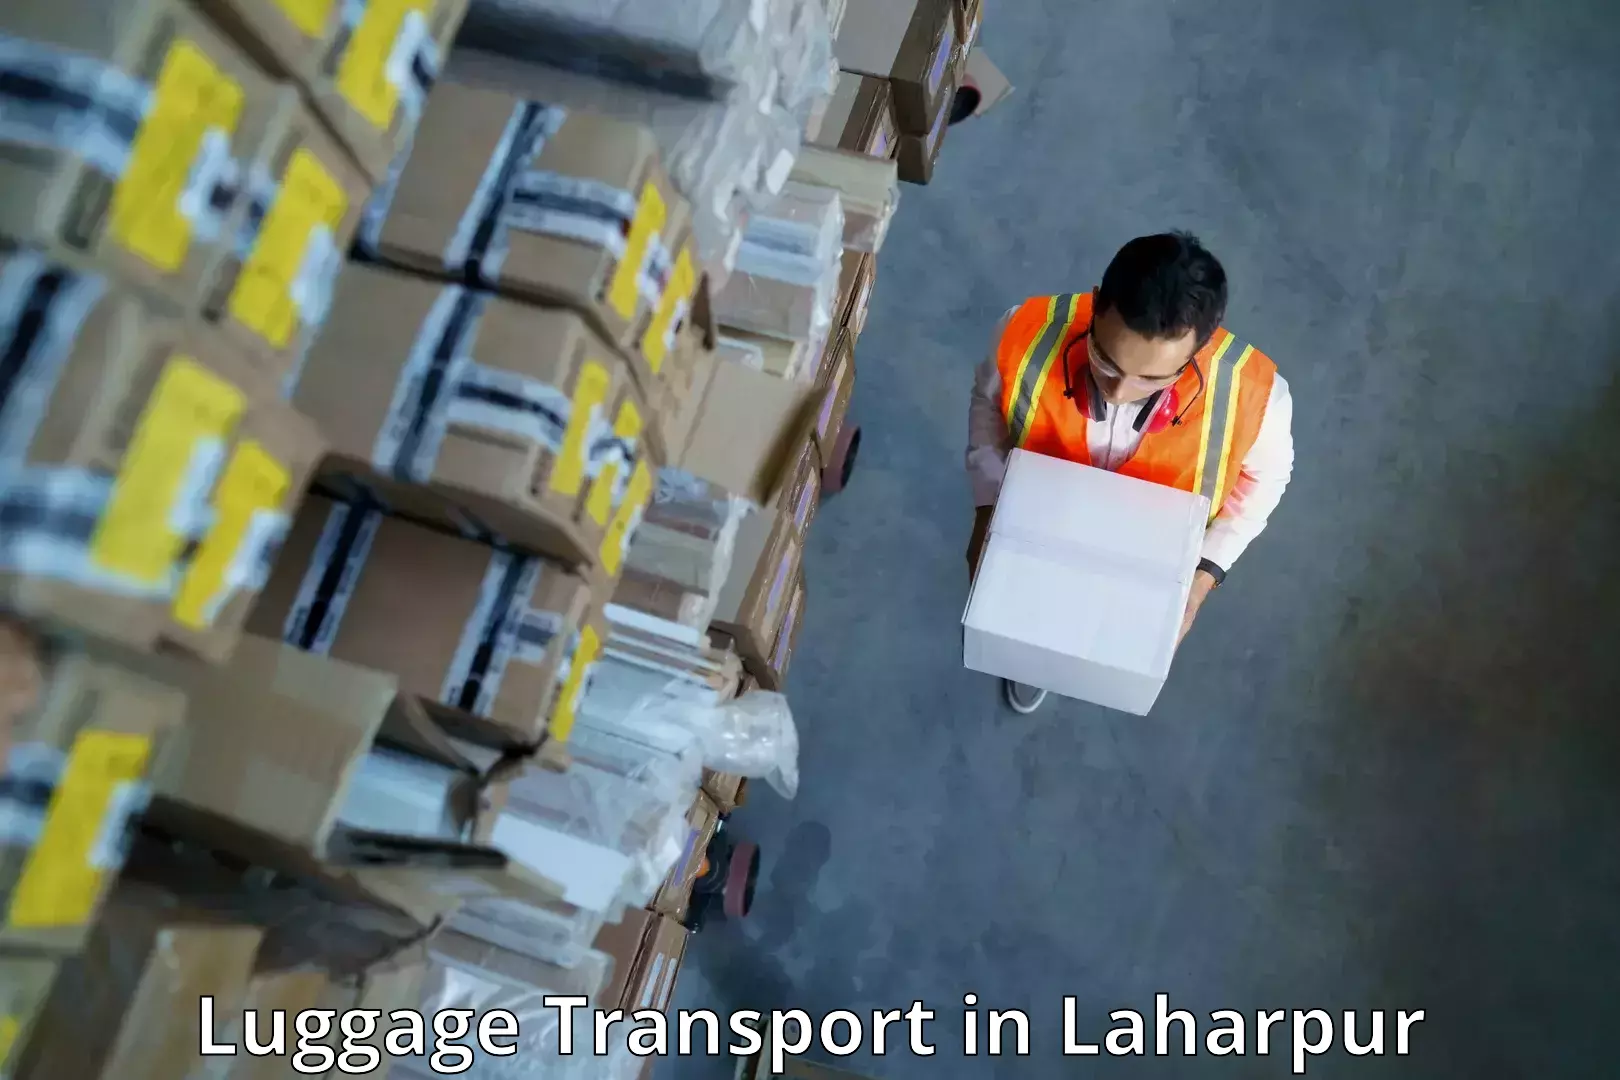 Doorstep luggage collection in Laharpur